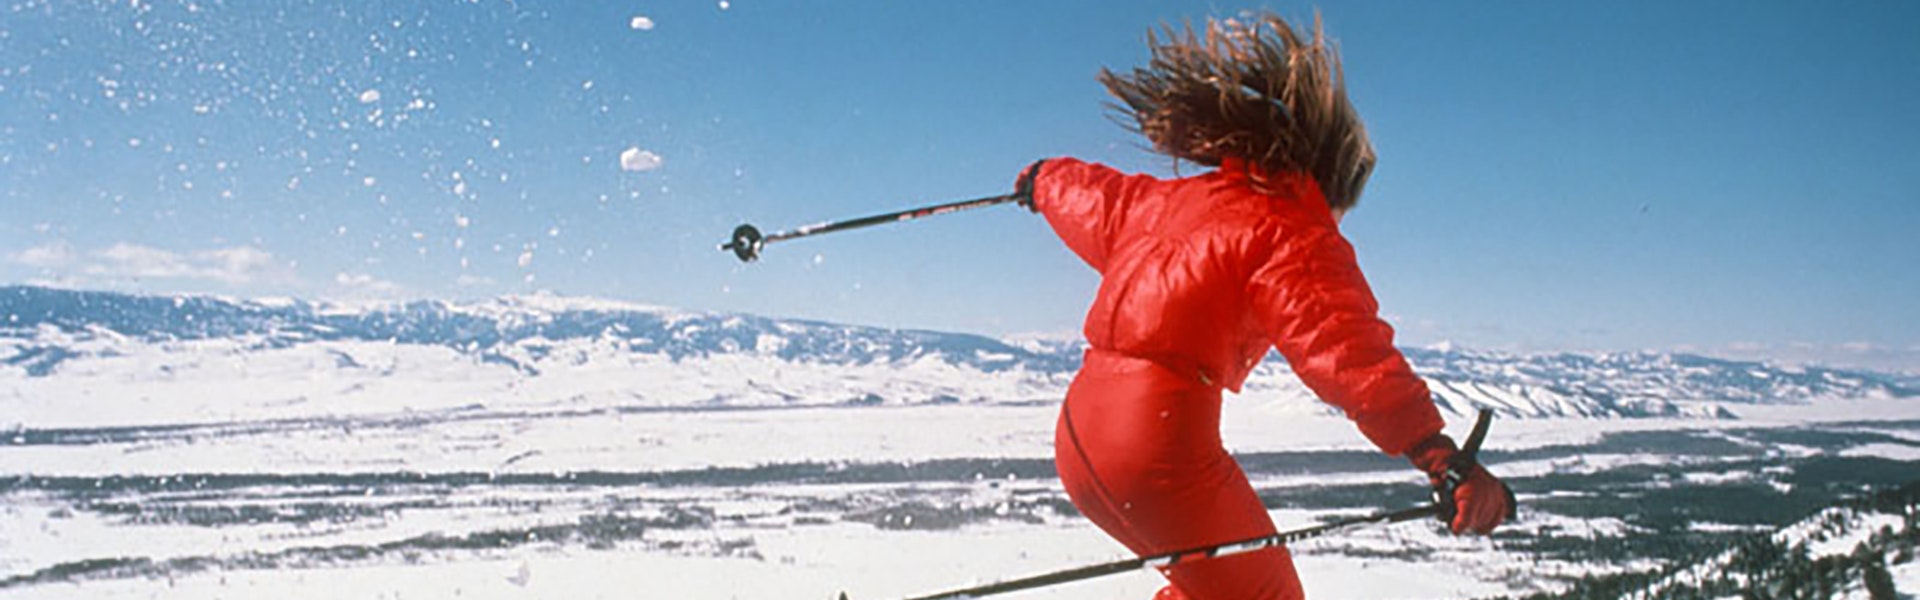 Woman jumping on skinny skis in the 80s